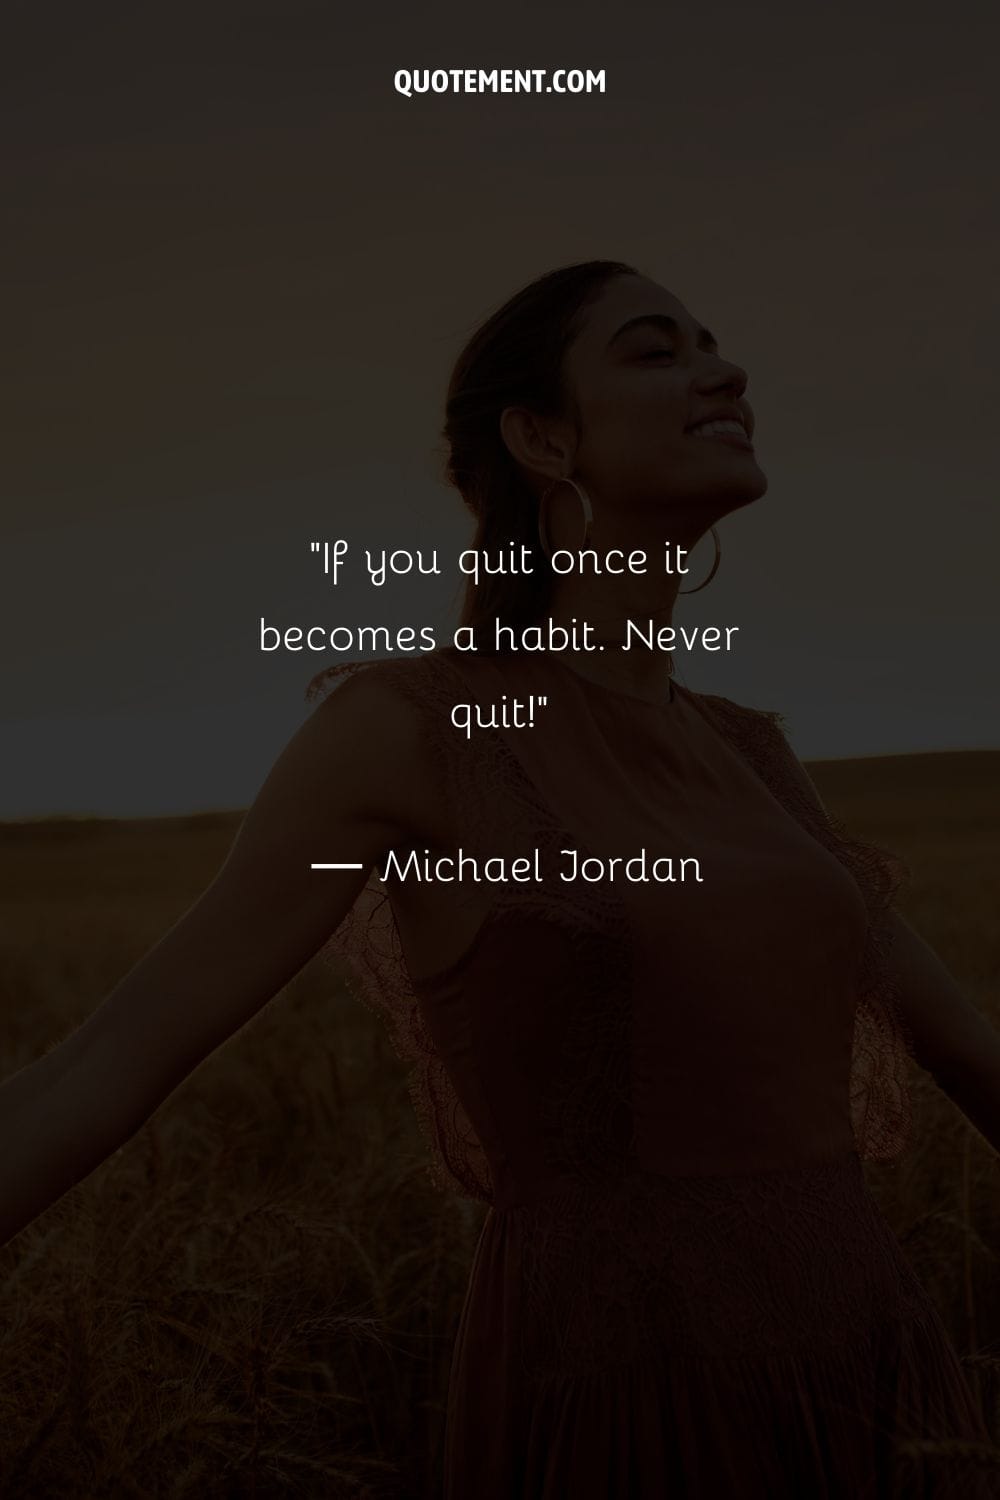 If you quit once it becomes a habit. Never quit